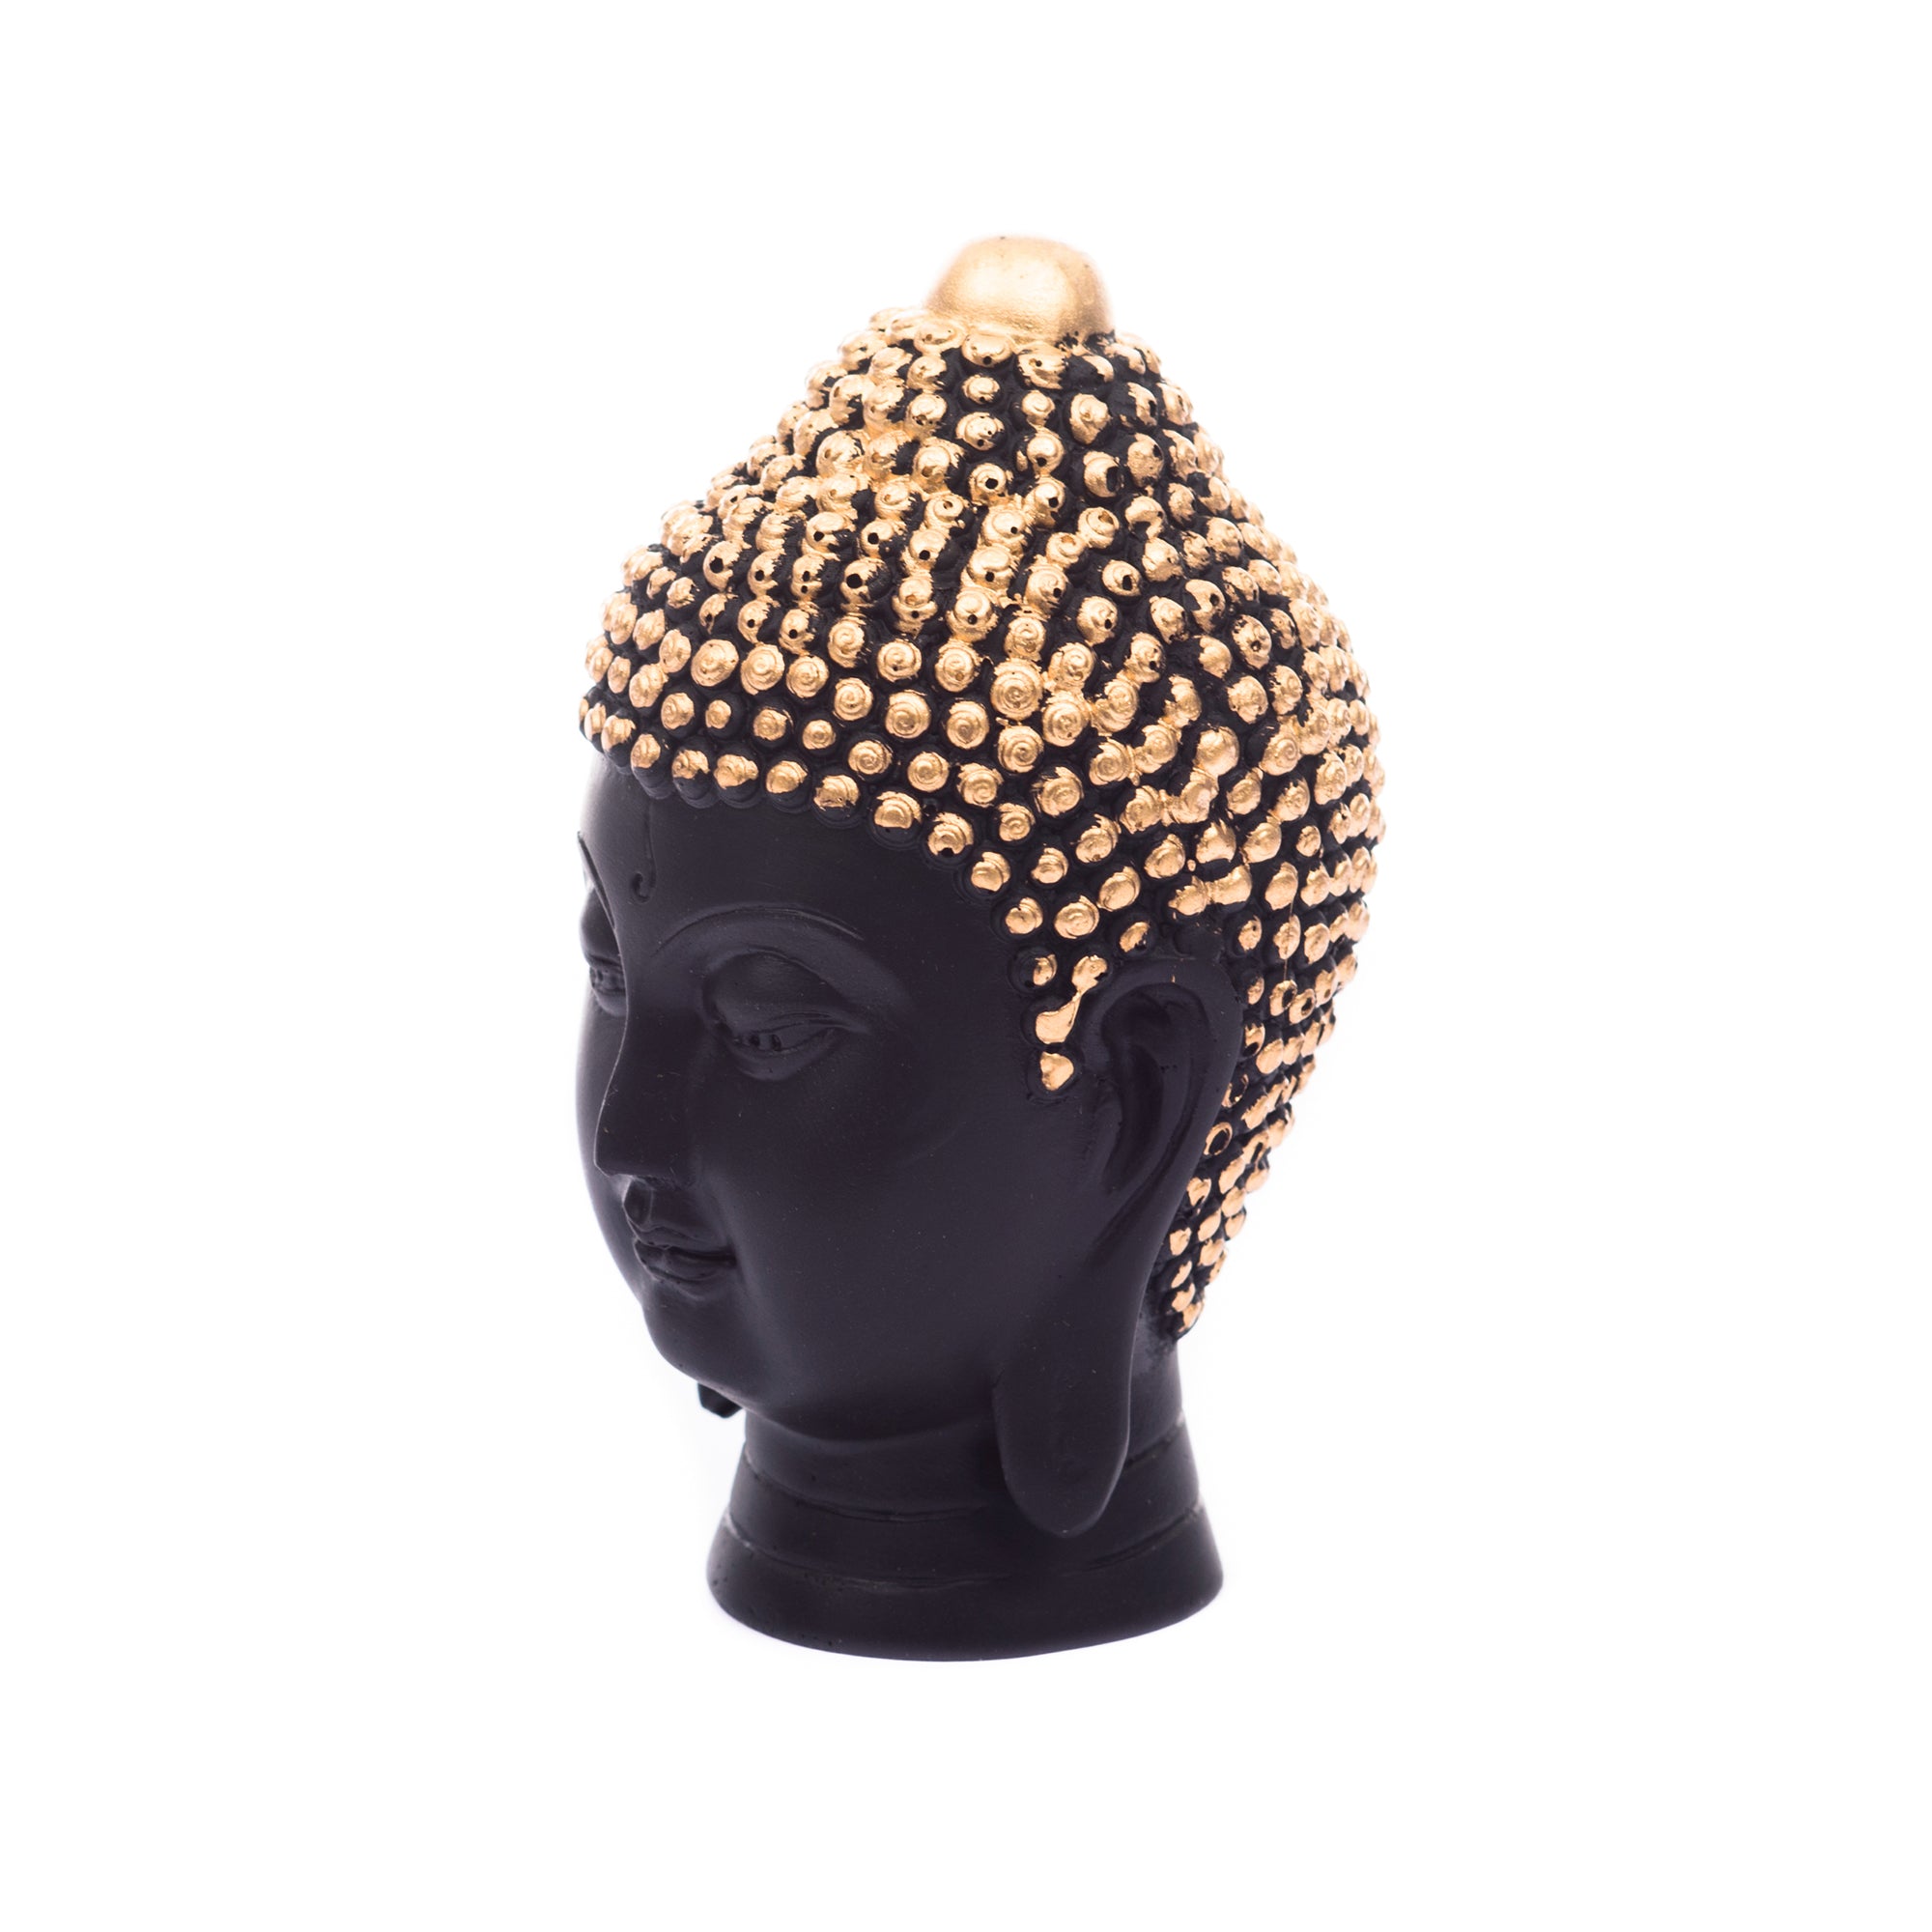 Polyresin Handcrafted Black And Golden Meditating Buddha Face Statue 3